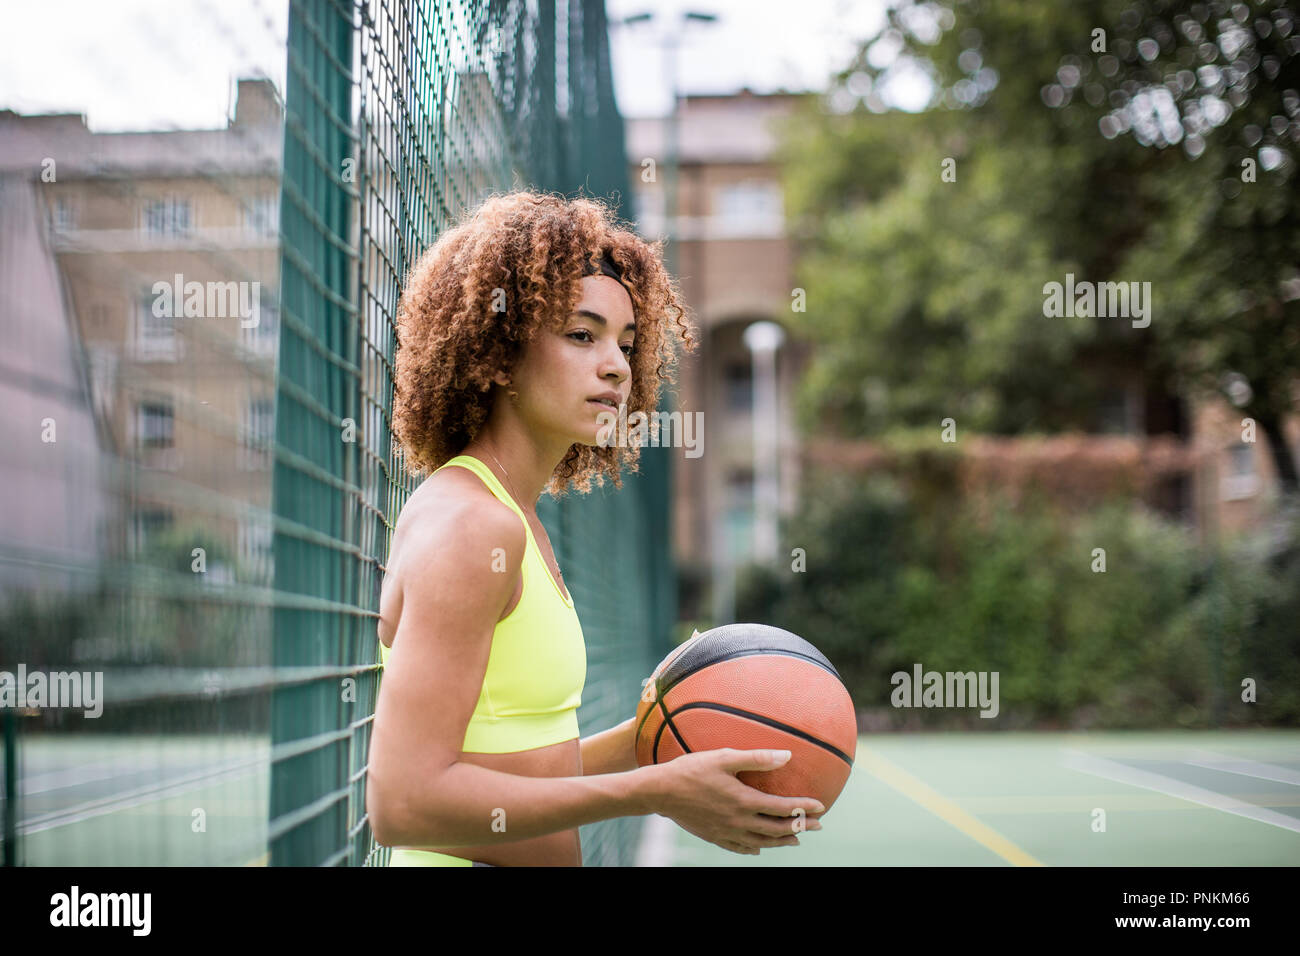 Young adult female on a basketball court Stock Photo